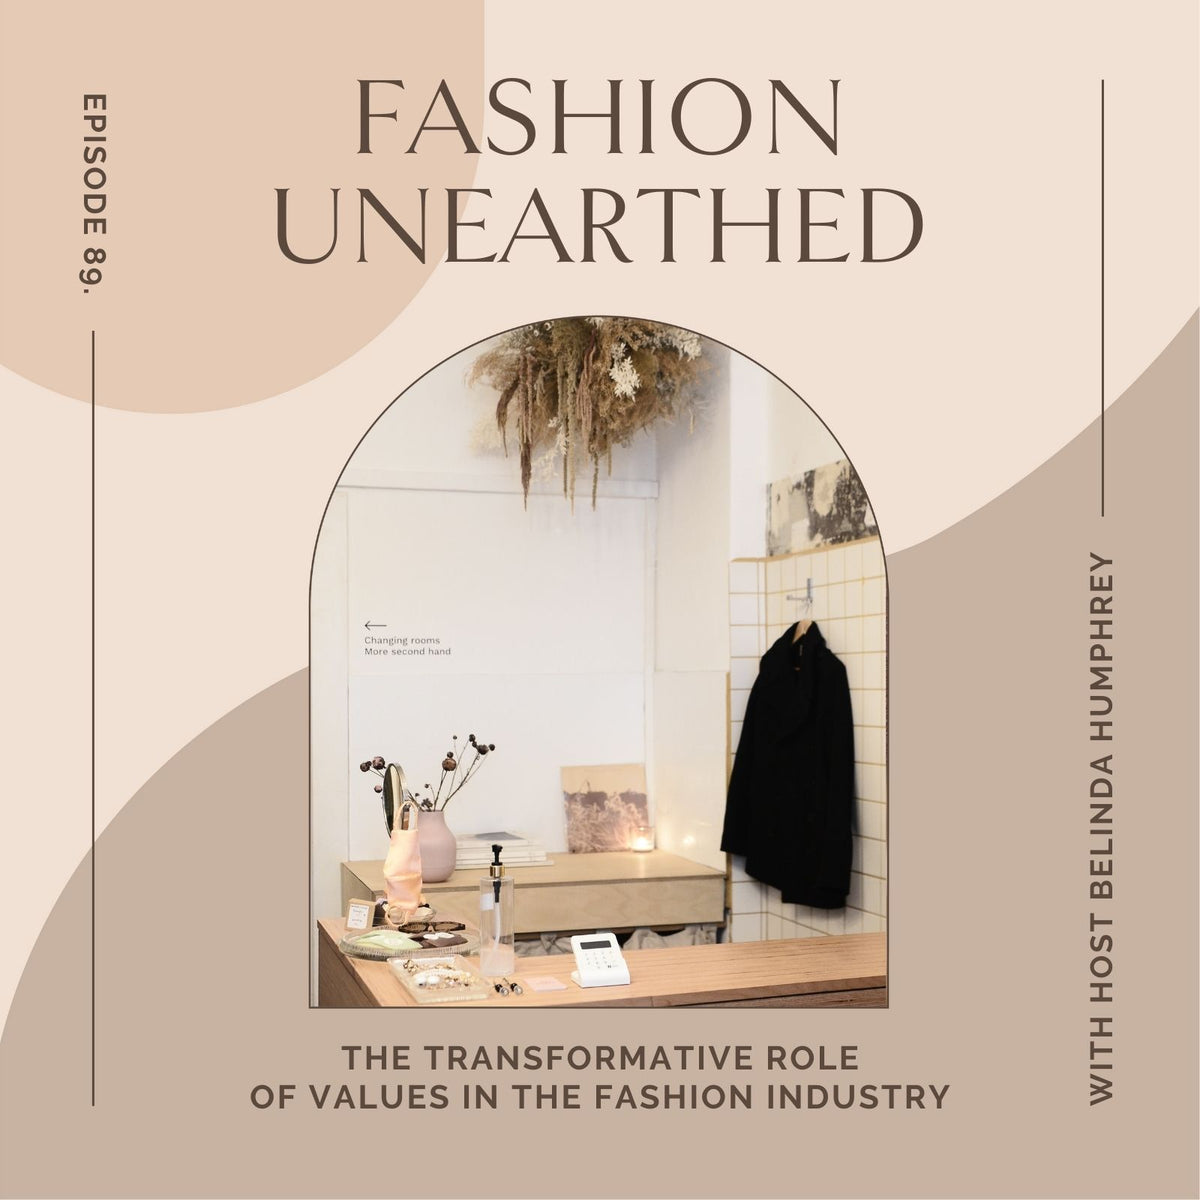 Episode 89: The Transformative Role of Values in the Fashion Industry